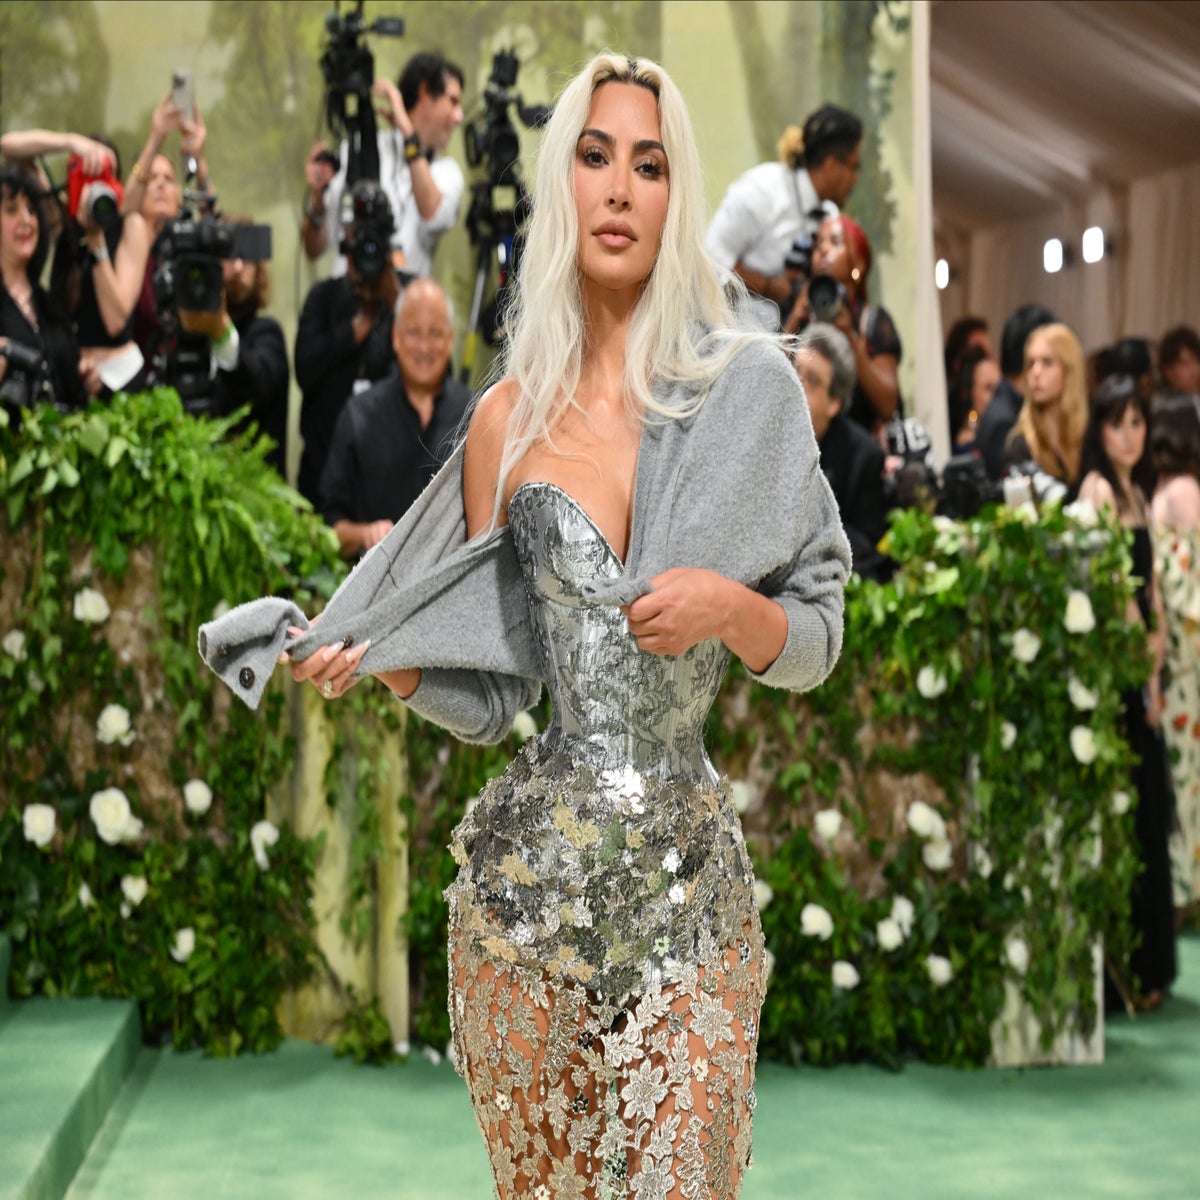 Kim Kardashian's Met Gala dress shows she's a terrible role model to women  | The Independent